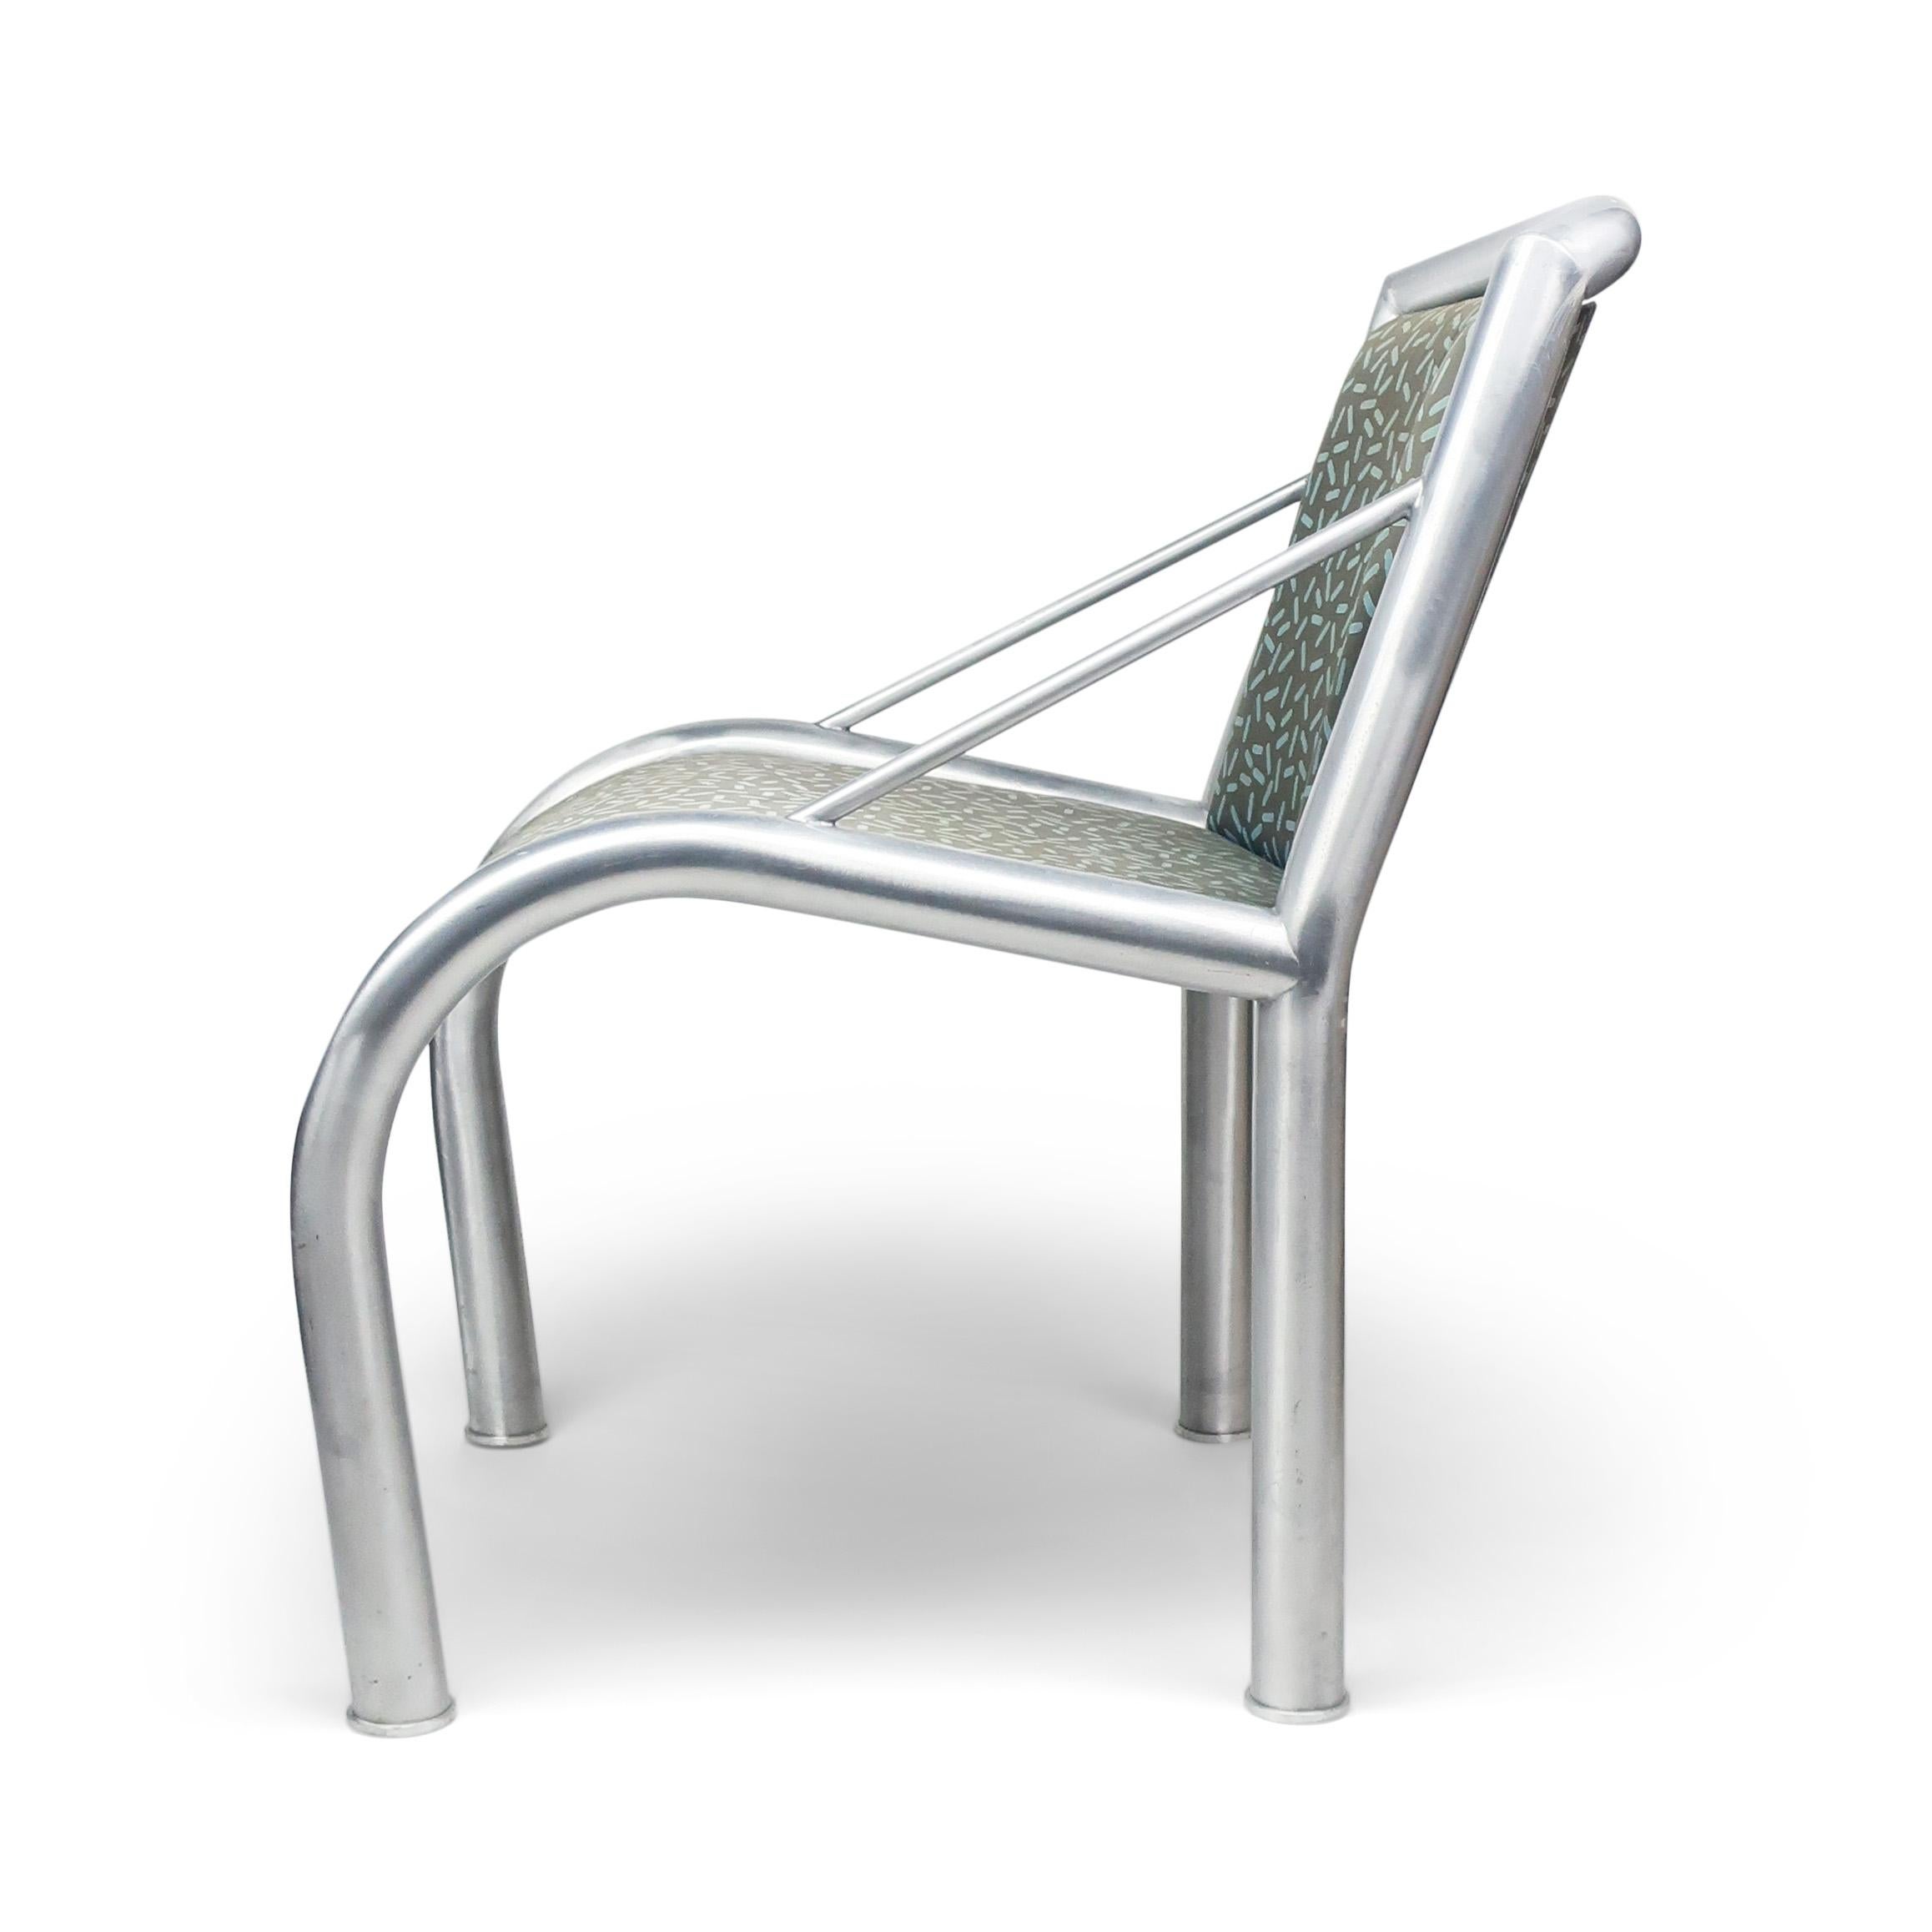 An aluminum arm chair designed by Marco Zanini for Memphis Milano in 1984 and upholstered in Letraset, a cotton fabric designed by Ettore Sottsass. 

Signed on underside of the seat. In good vintage condition with wear consistent with age and use,